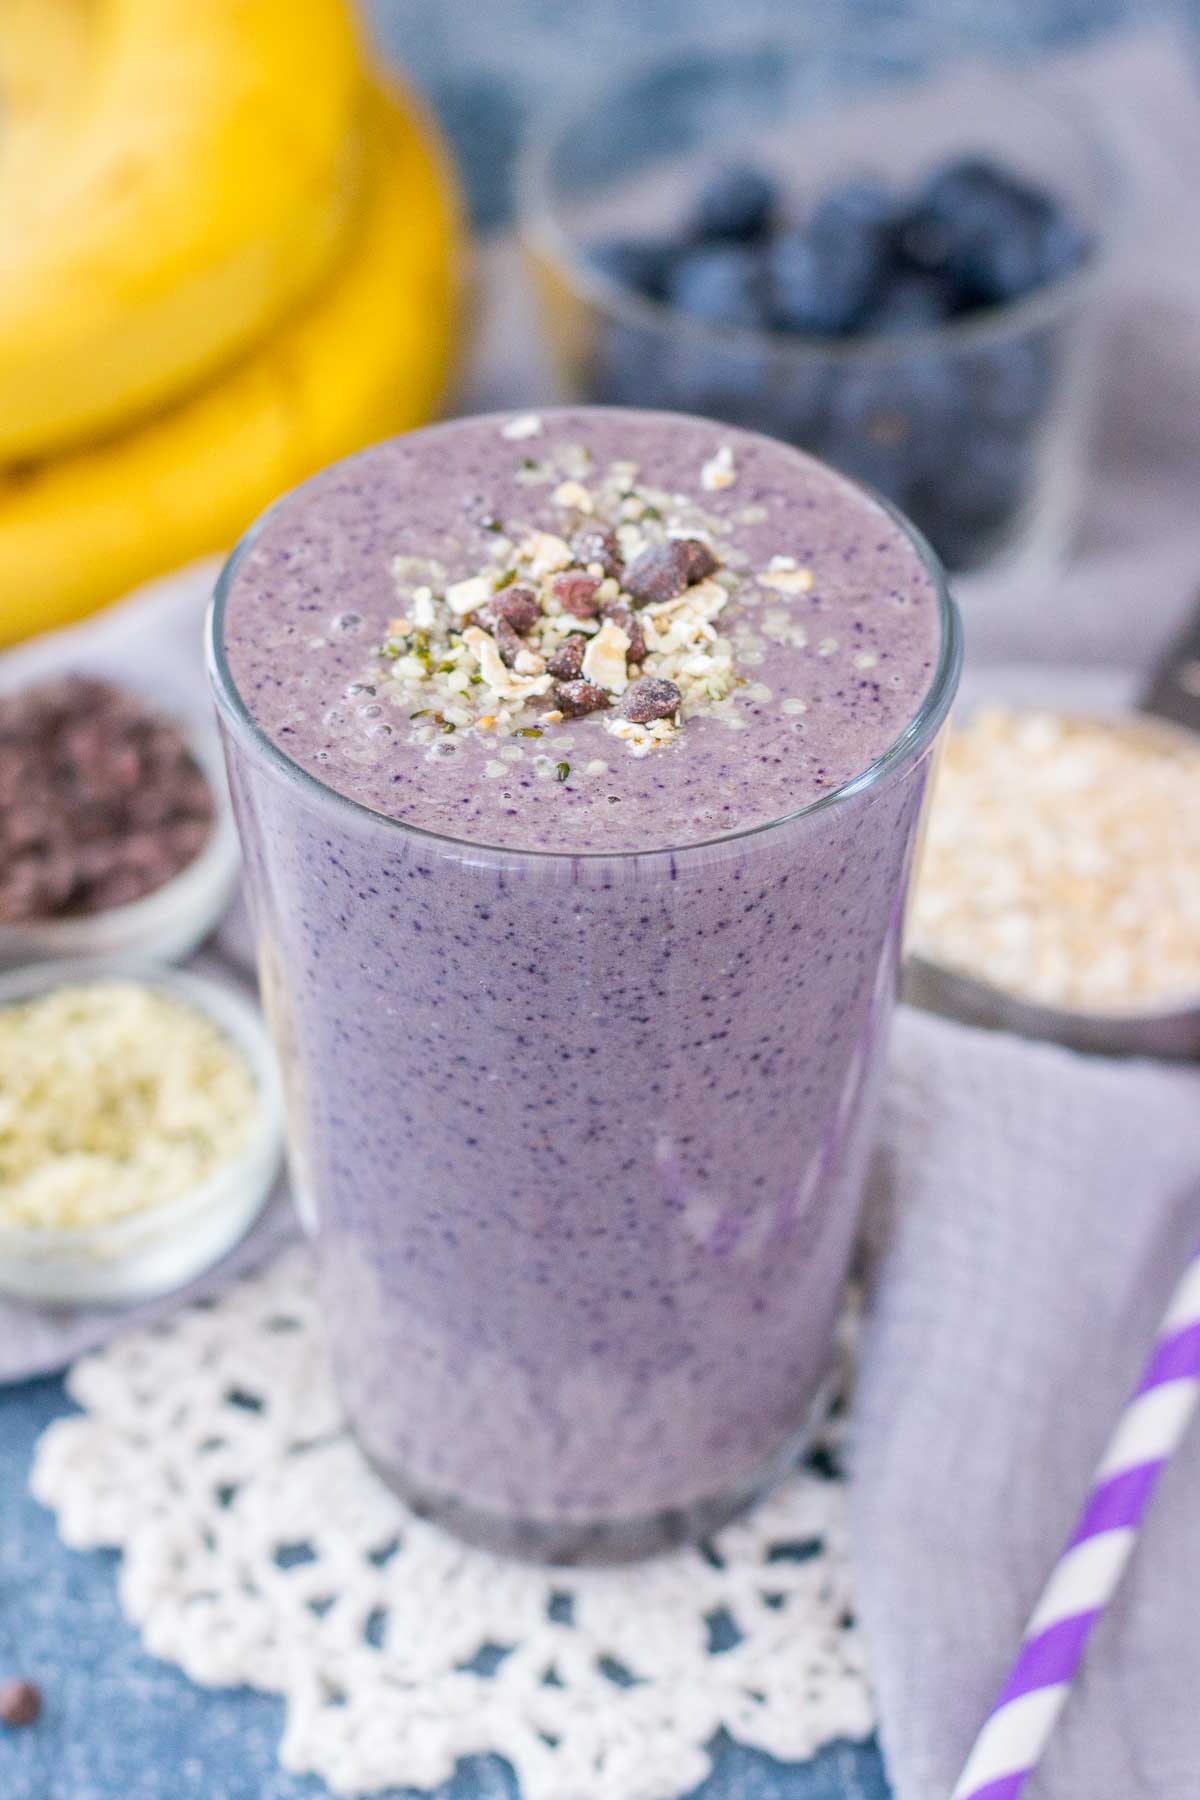 Blueberry Banana Smoothie with fresh fruits and oats